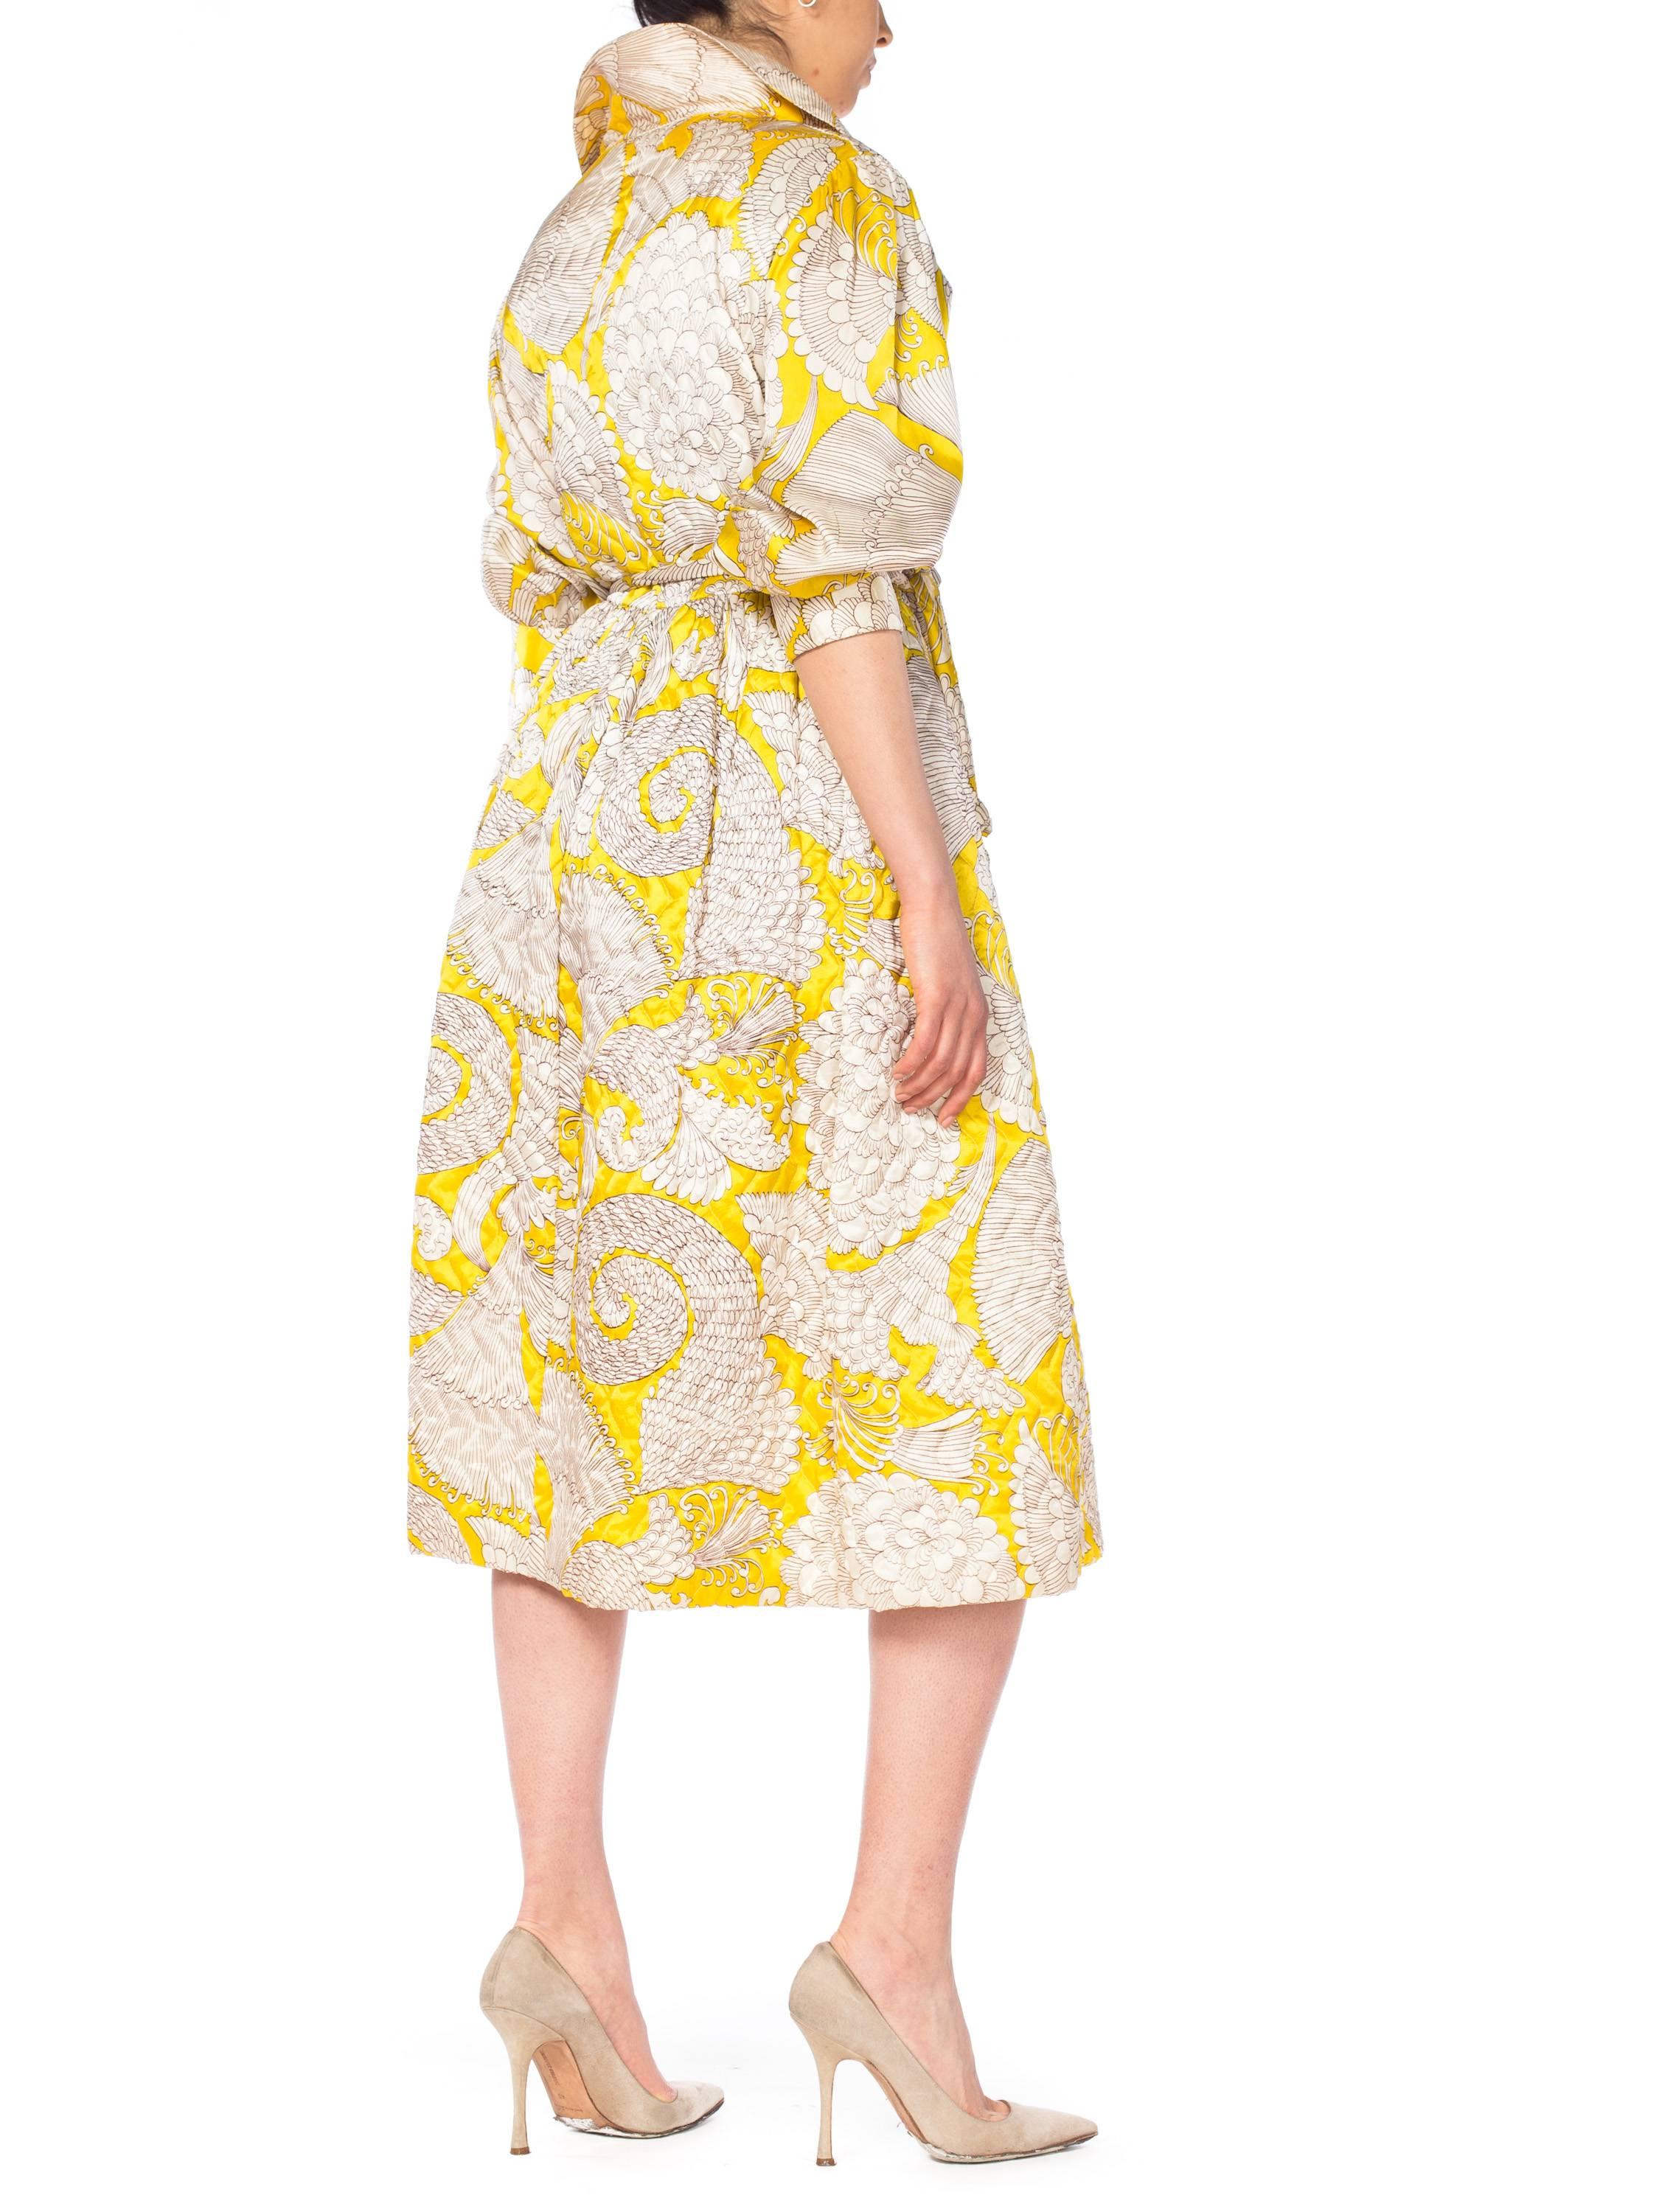 Women's 1960s Quilted Printed Coat Dress